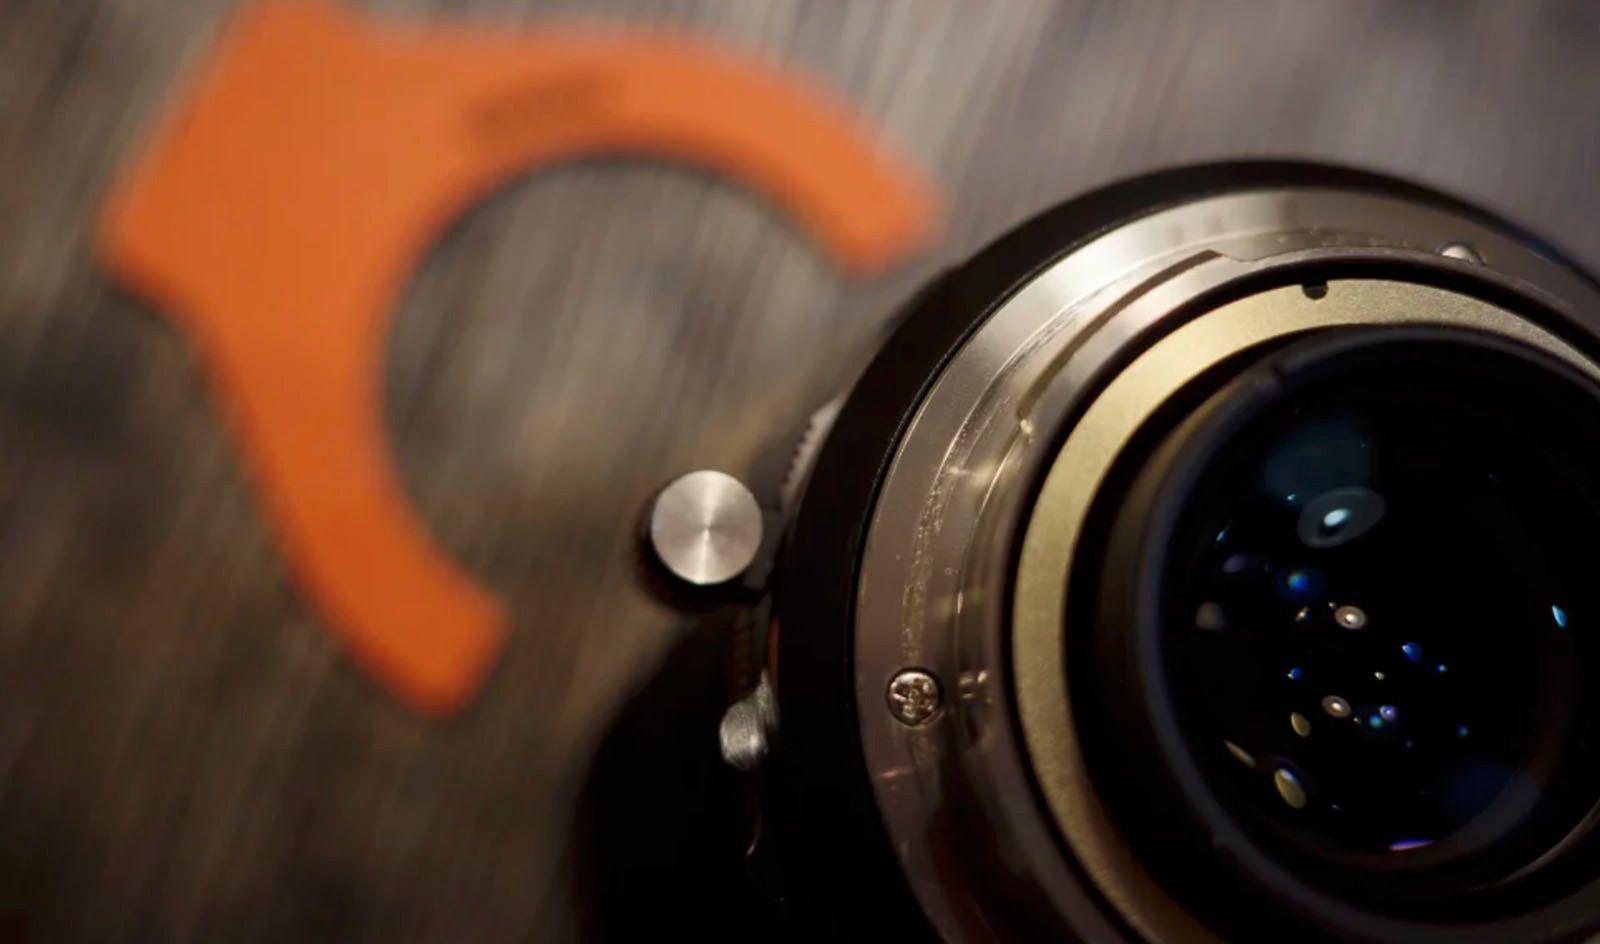 Close-up shot of a camera lens focusing on the rear element and the metal mount. In the blurred background, an orange plastic lens tool is visible. The image highlights details like bolts and glass reflections within the lens.